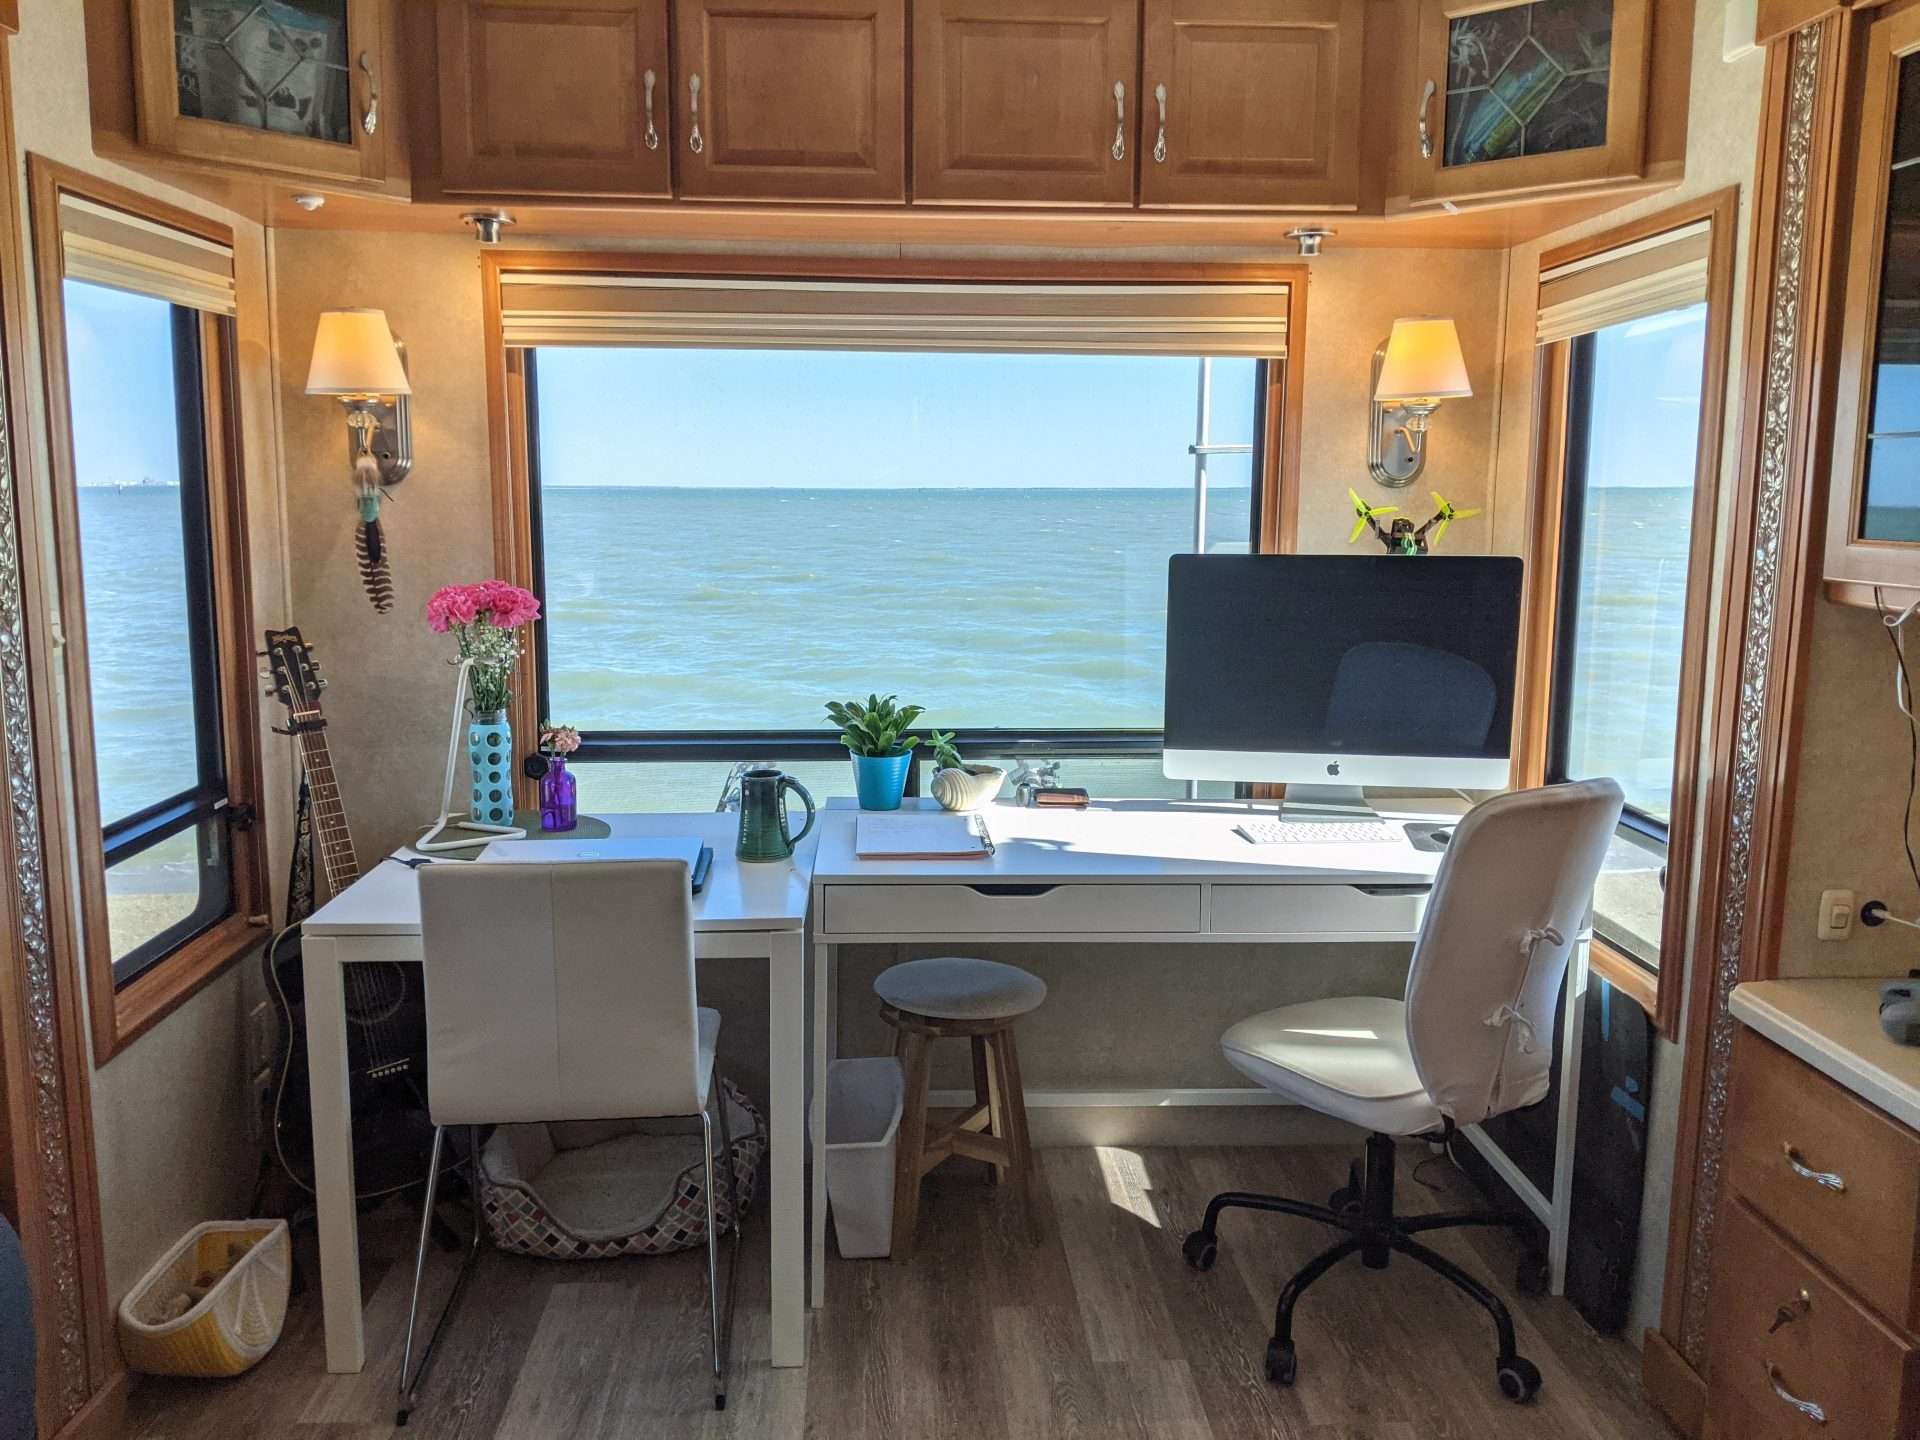 RV desk and computer looking out window to the ocean